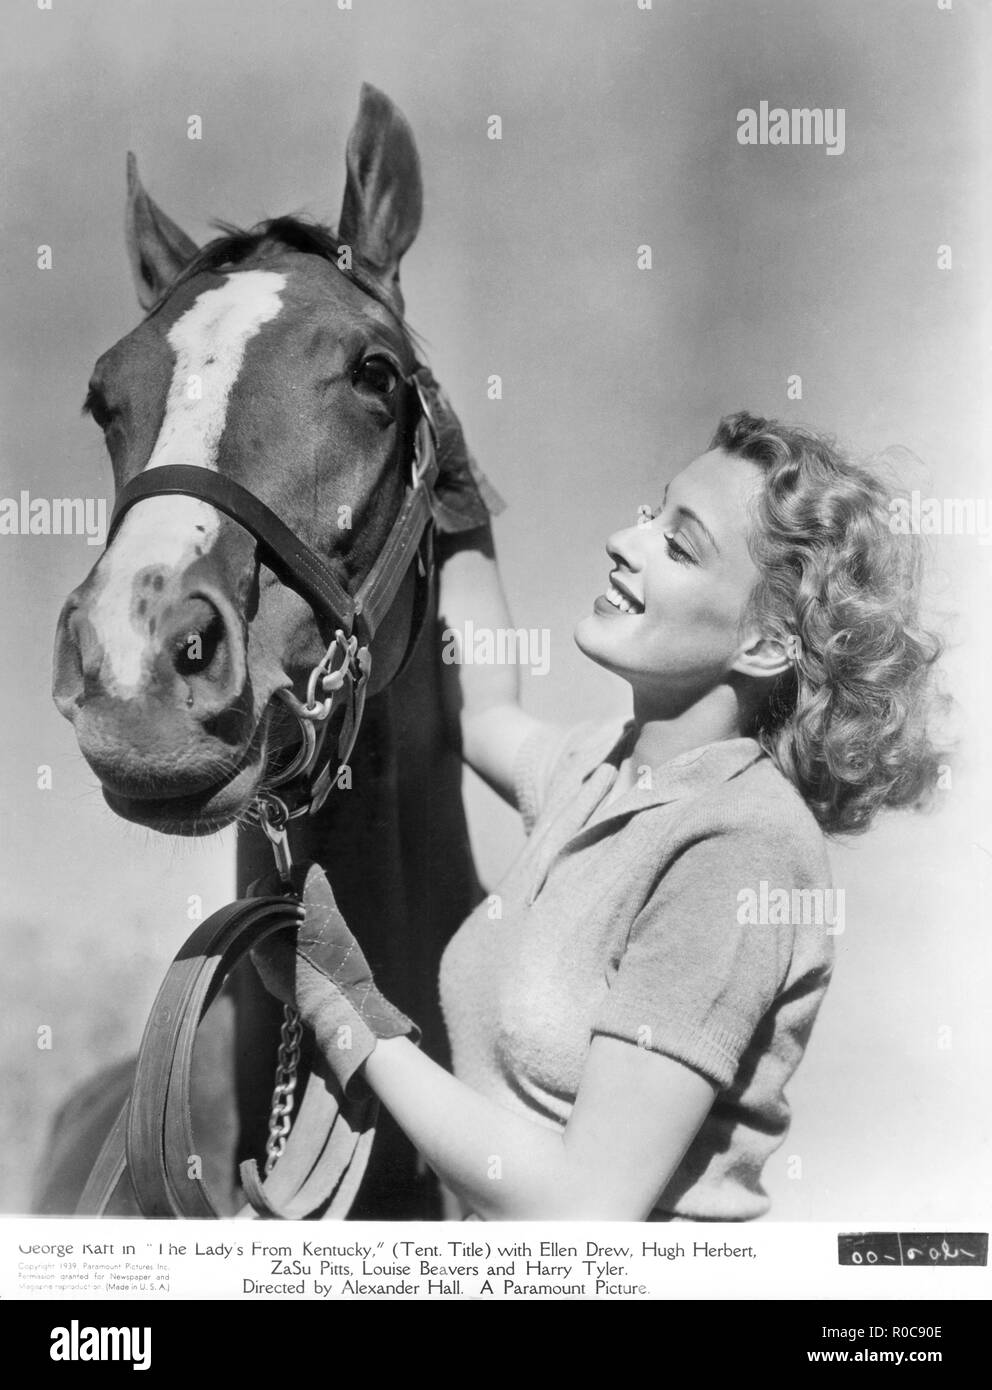 Actress Ellen Drew, Publicity Portrait with Horse for the film, 'The Lady's from Kentucky', Paramount Pictures, 1939 Stock Photo